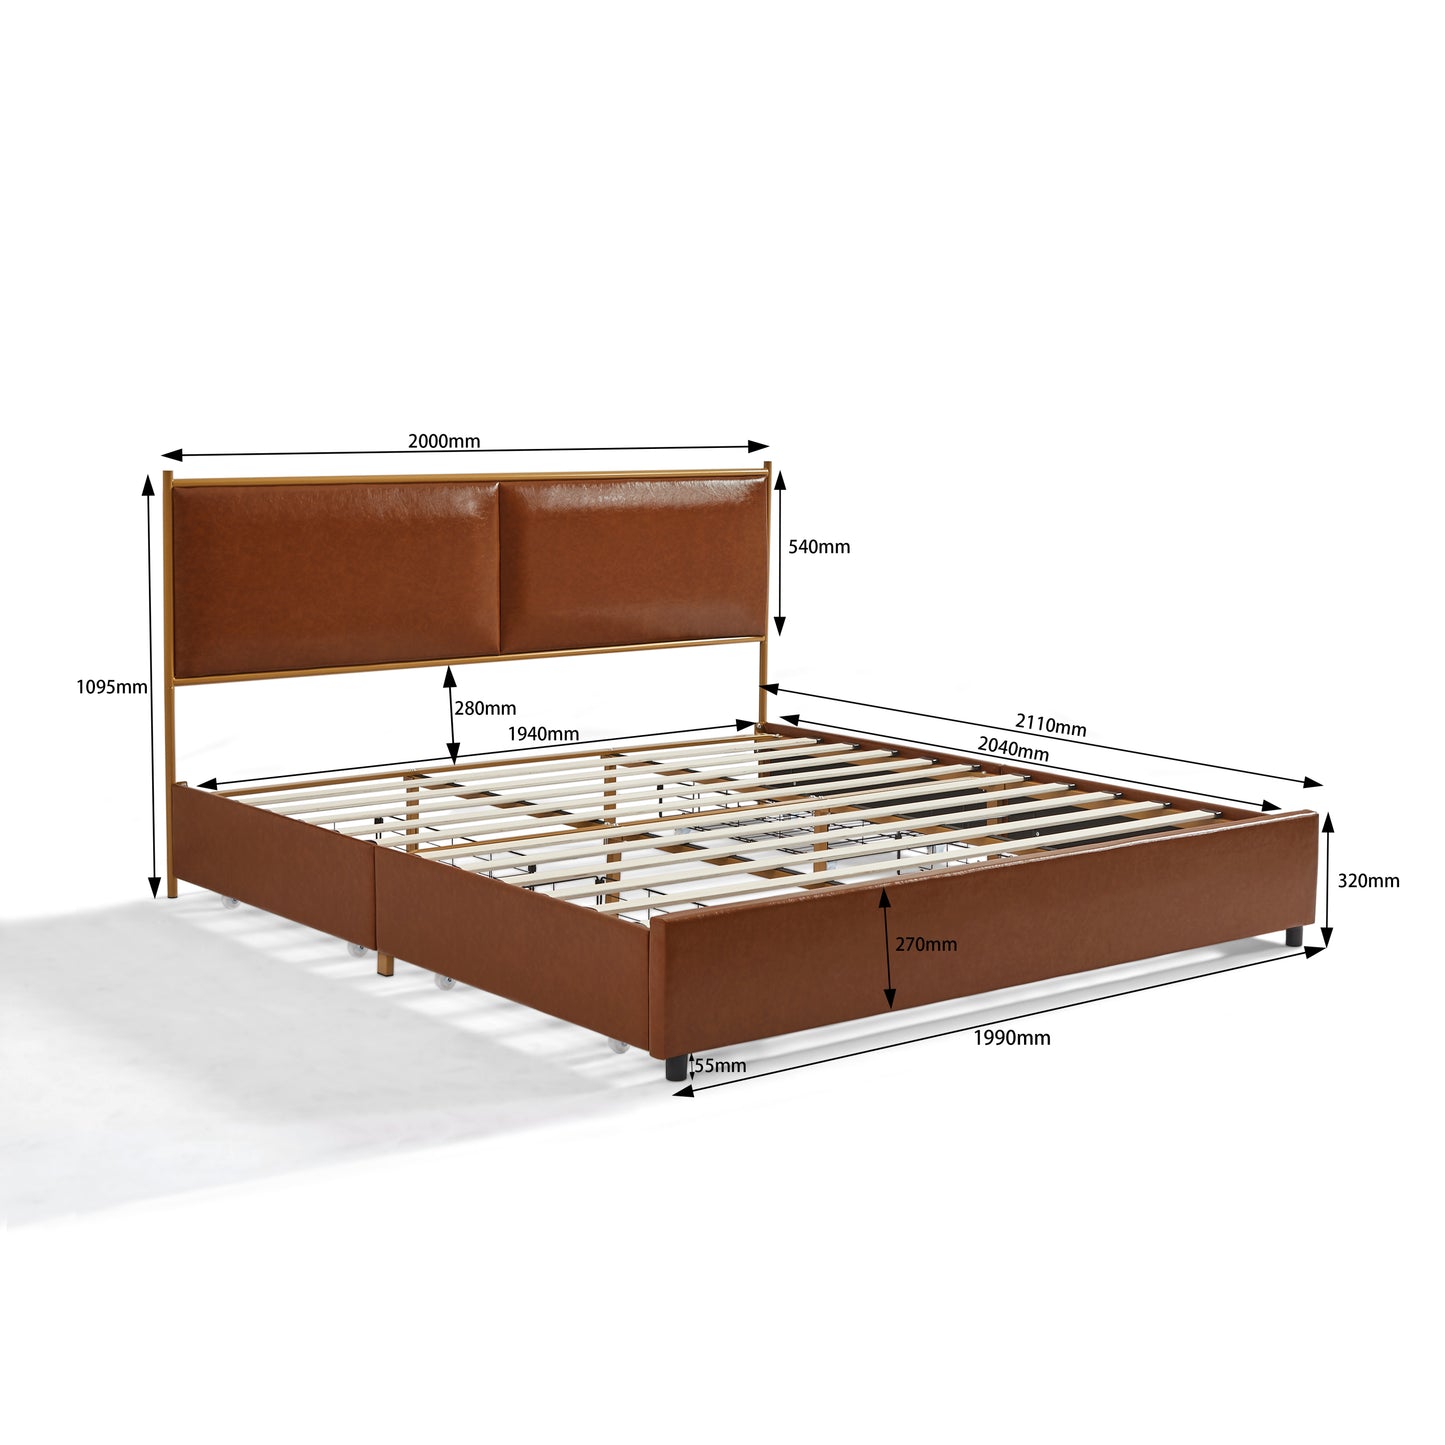 King Size Upholstered Platform bed with 4 Storage Drawers, Classic Steamed Bread Shaped Backrest, Coffee